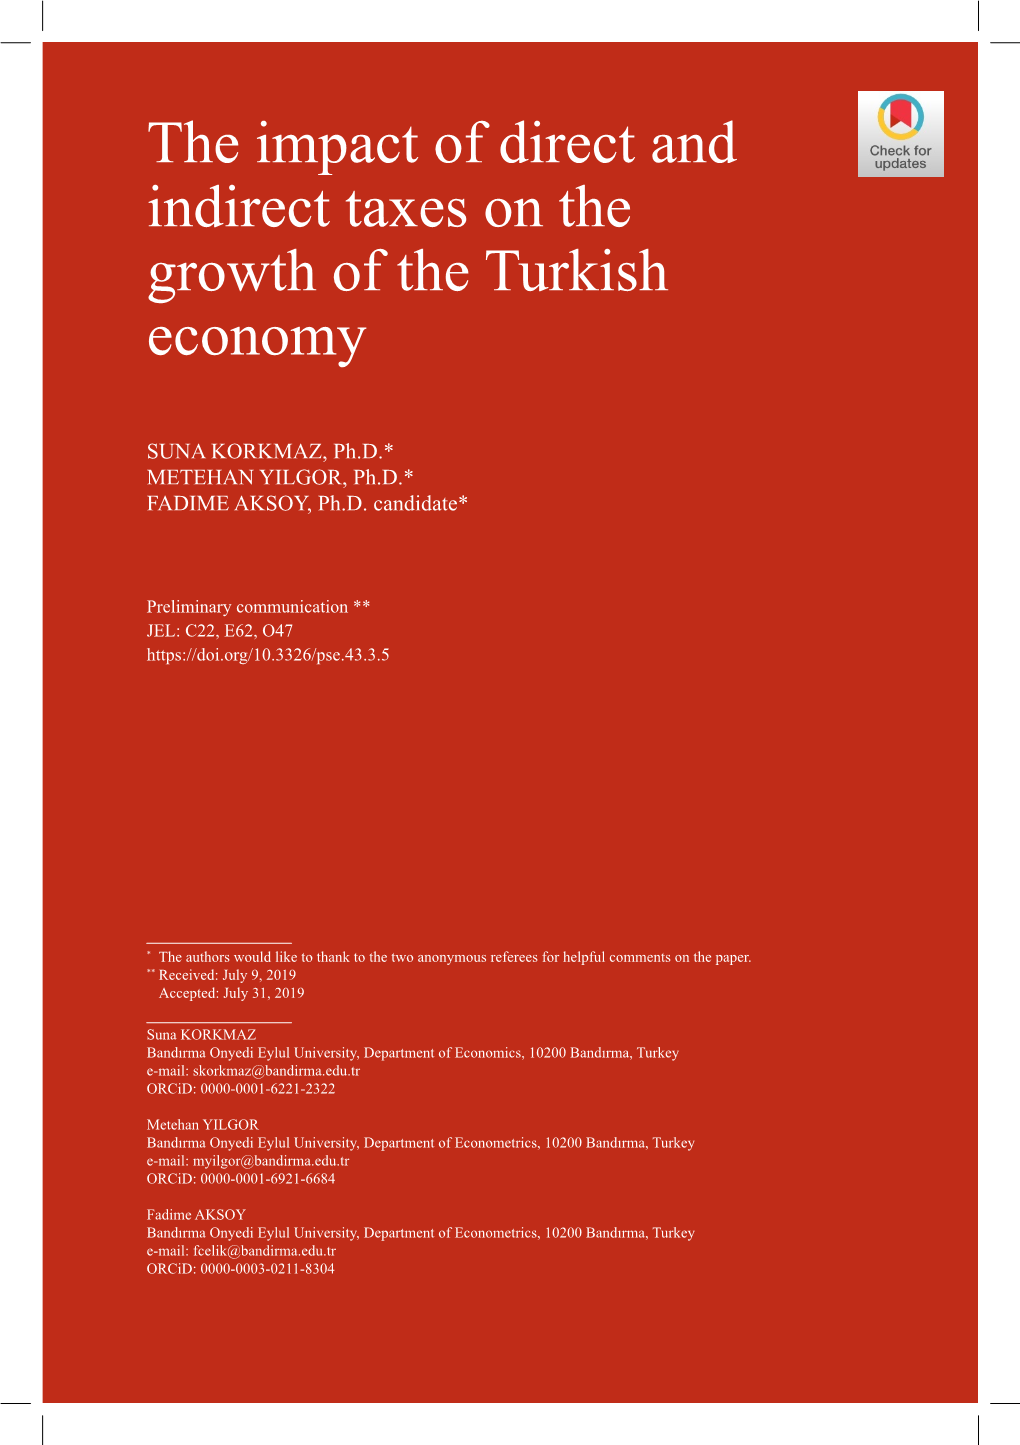 The Impact of Direct and Indirect Taxes on the Growth of the Turkish Economy